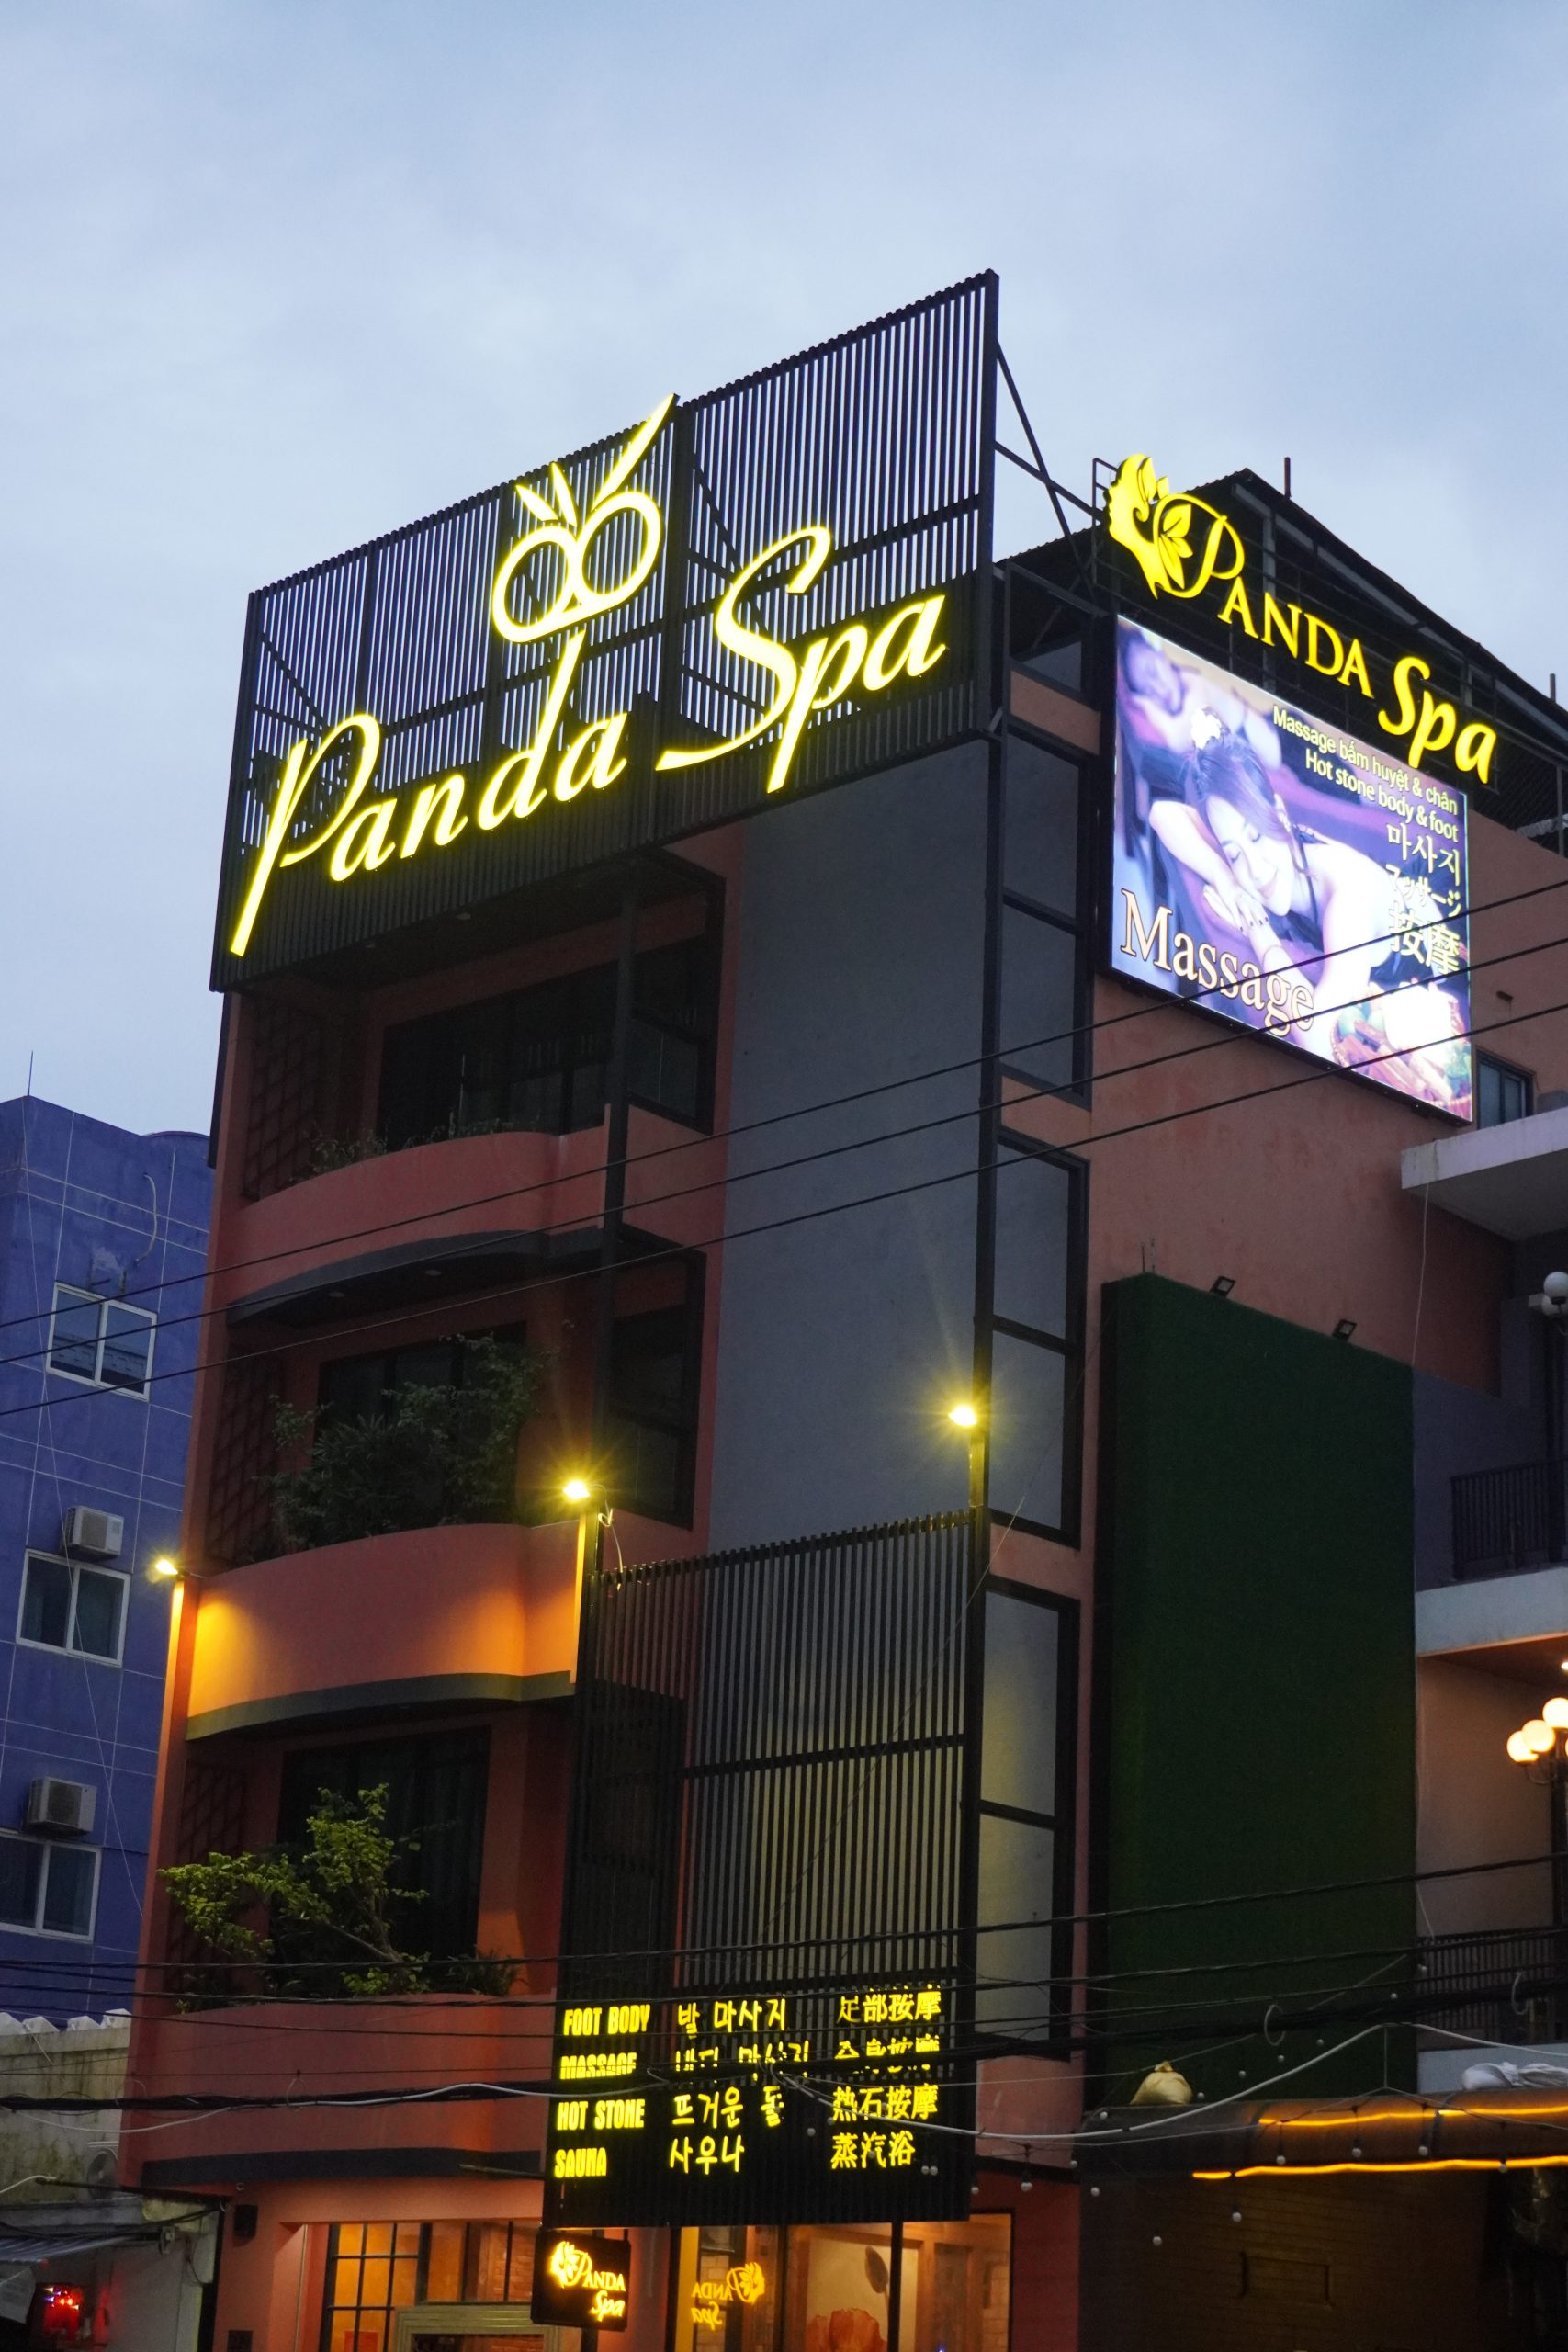 Why Panda Spa Danang is suitable for relaxing Massage